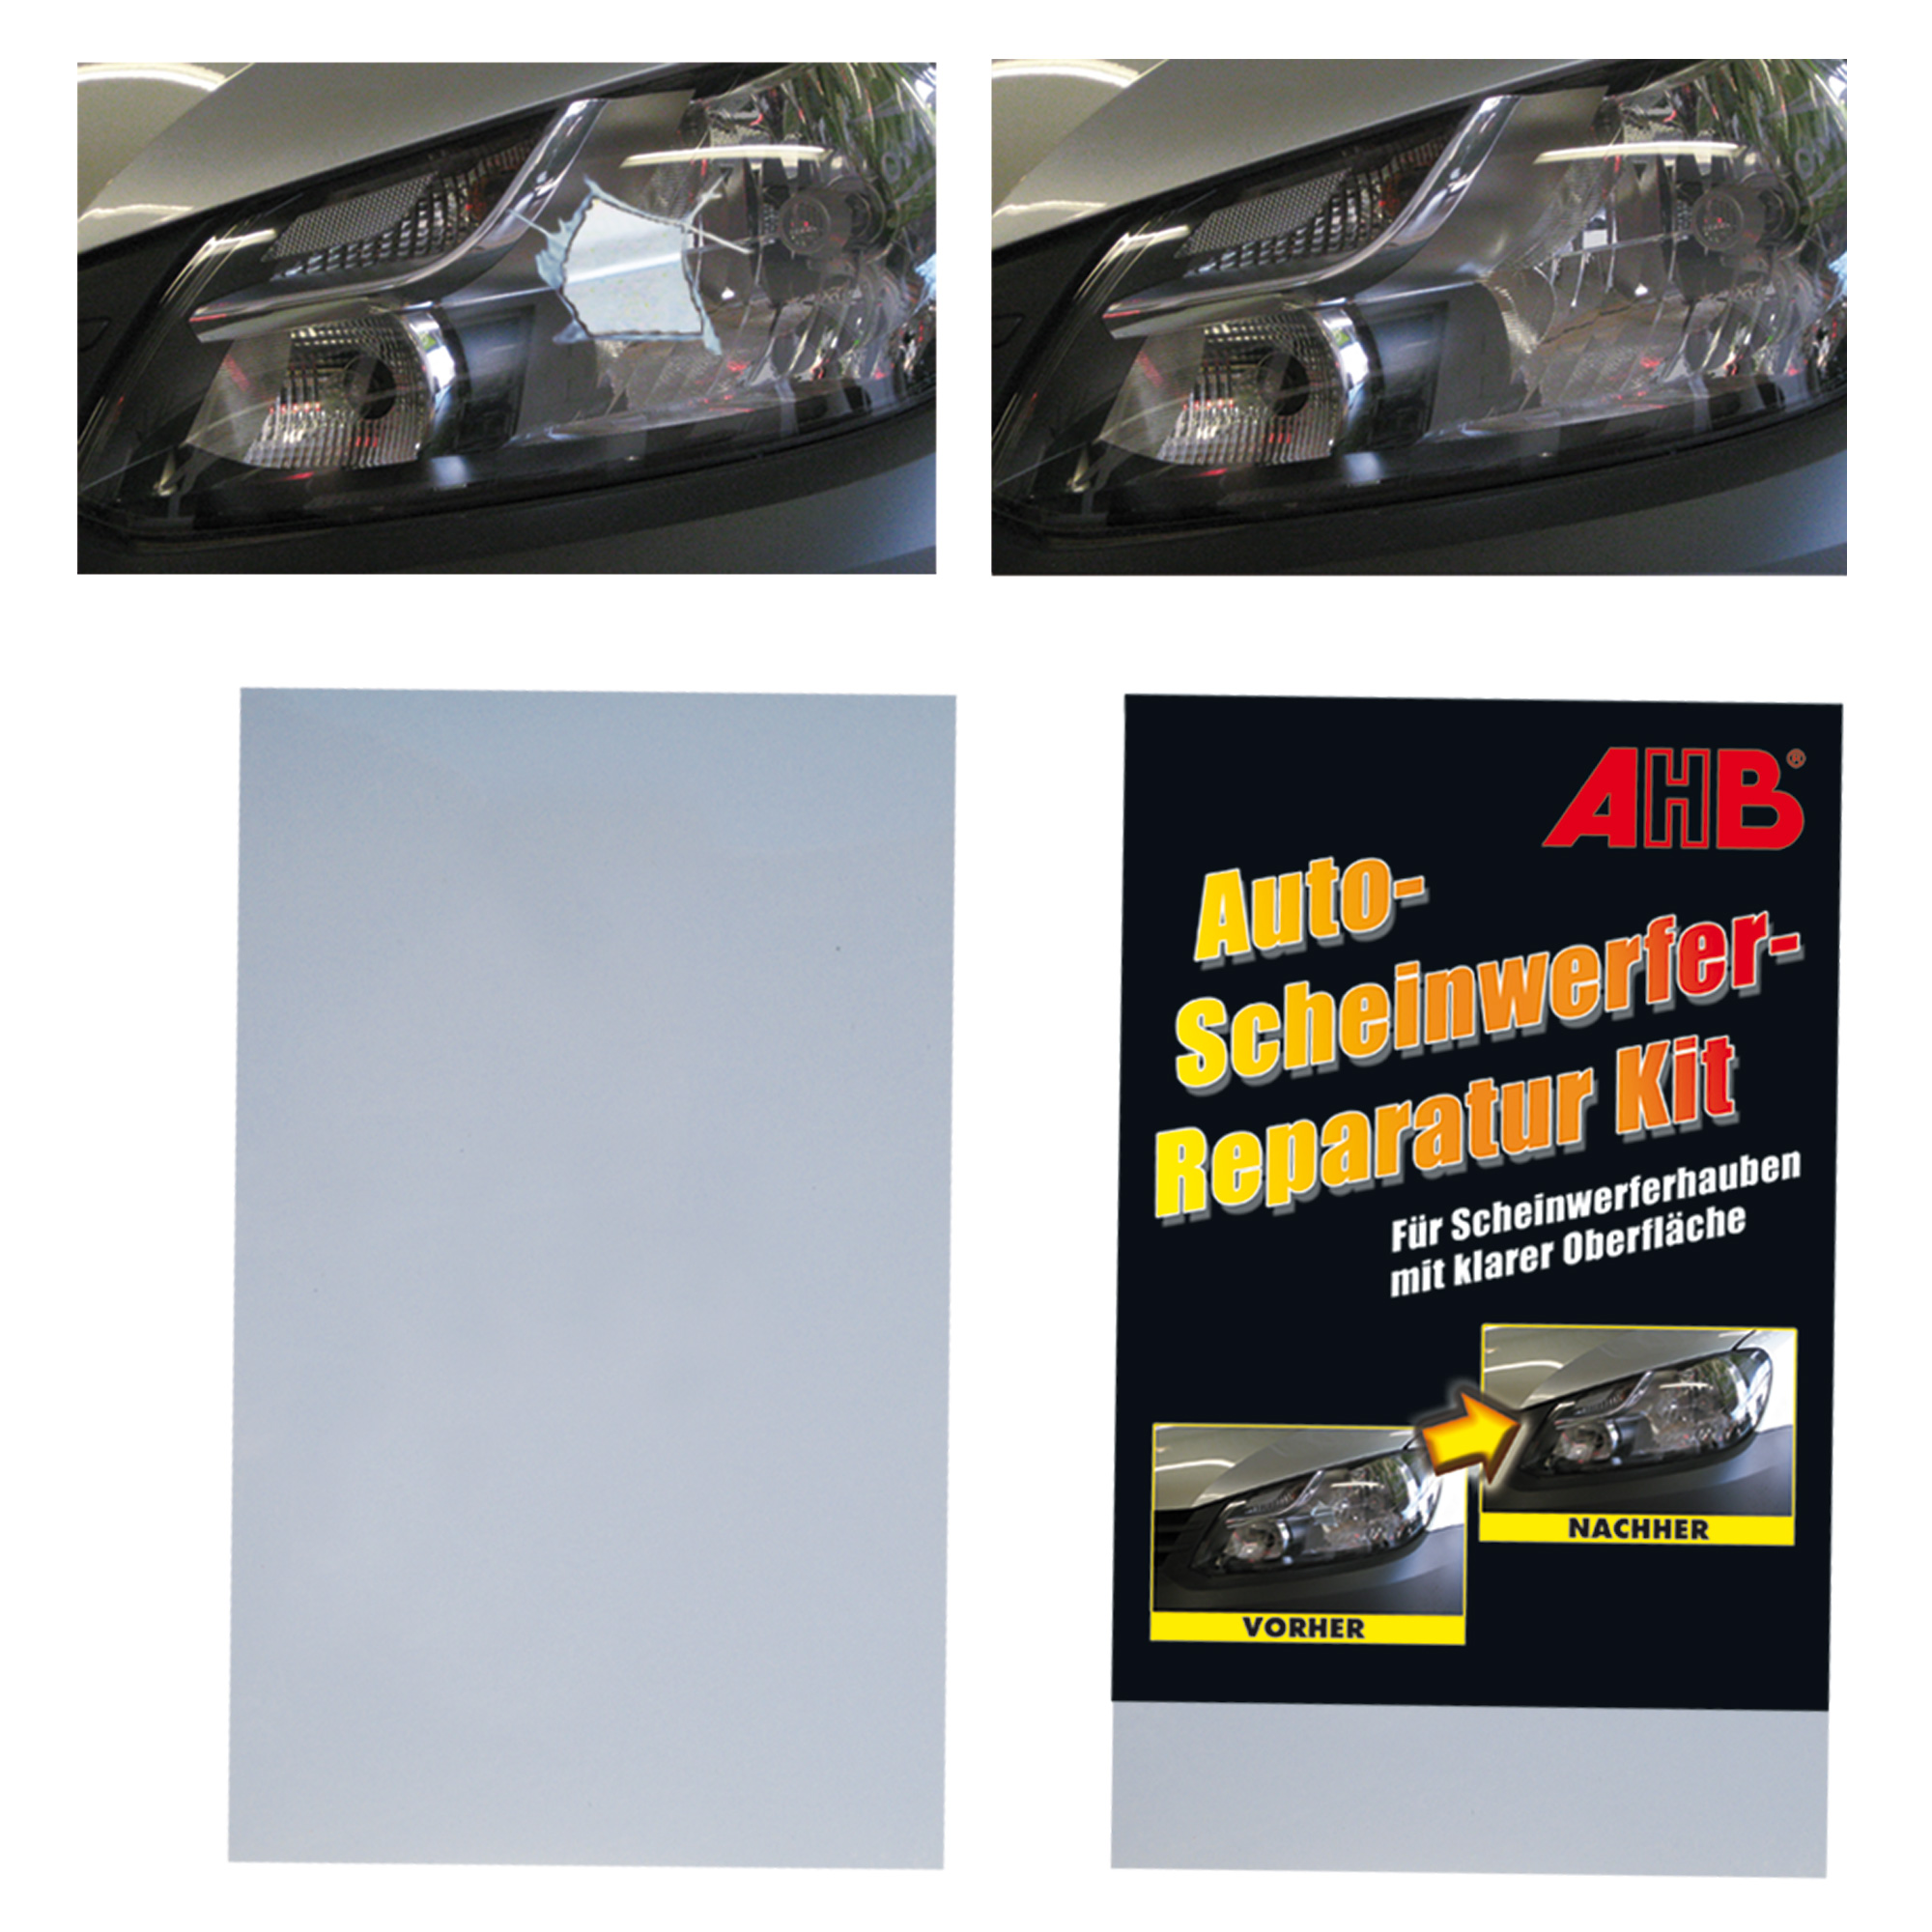 https://www.ahb-shop.com/out/pictures/master/product/1/339000270_Reparatur-Kit.jpg